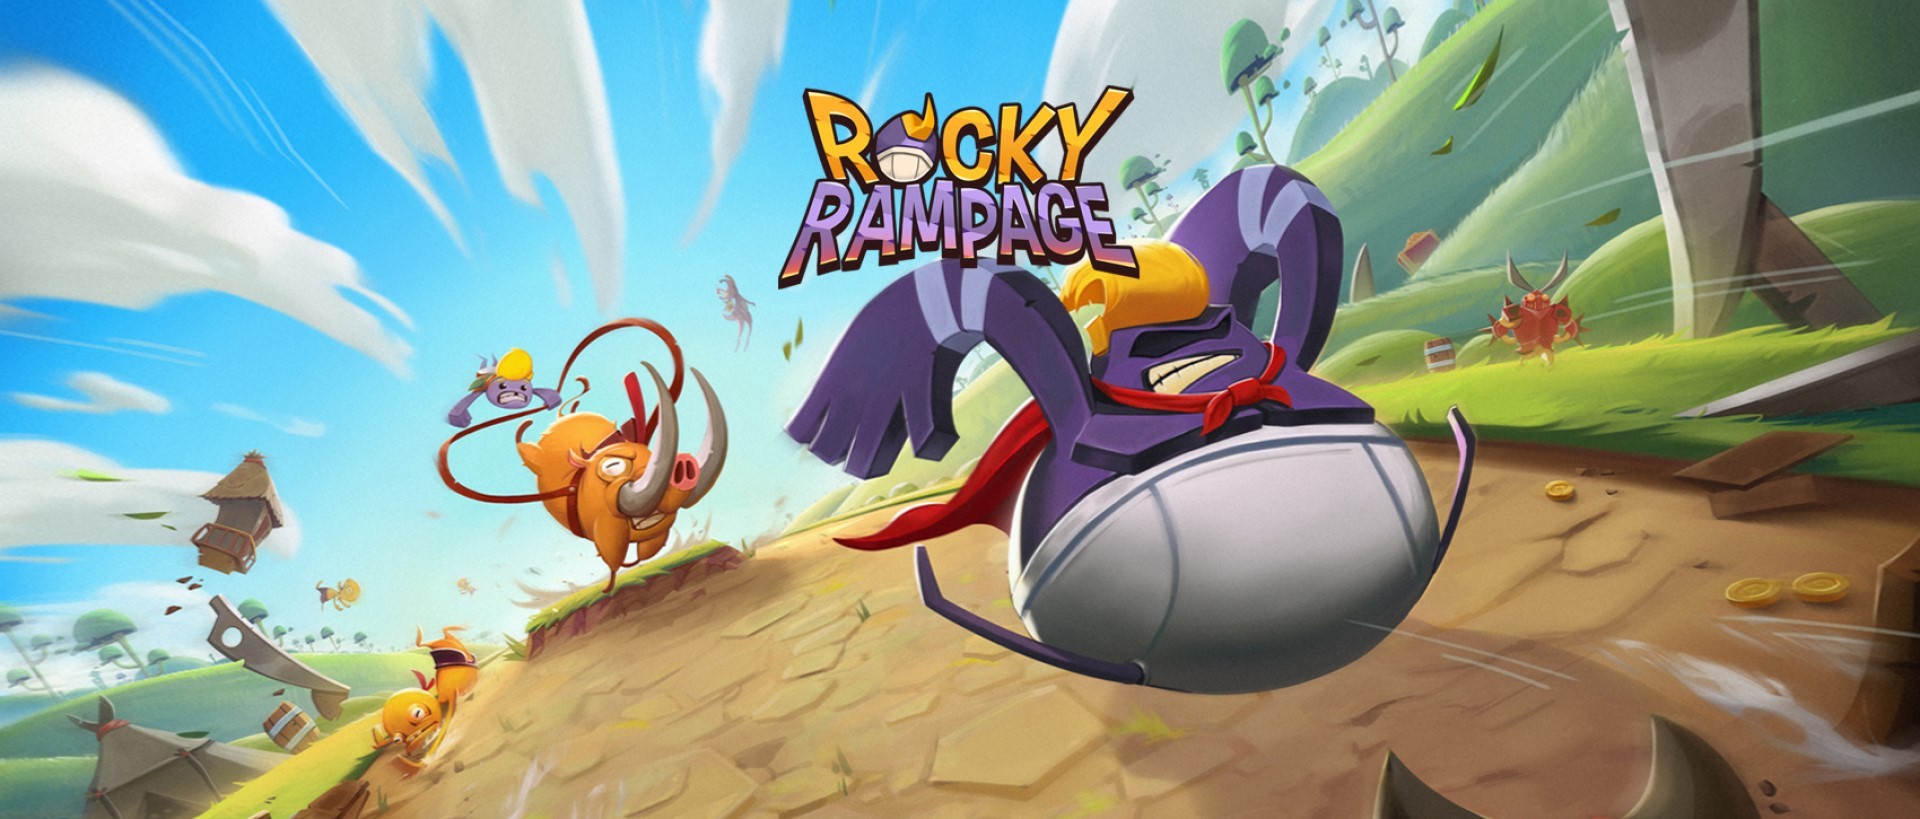 Rocky Rampage - Learn How to Get Money